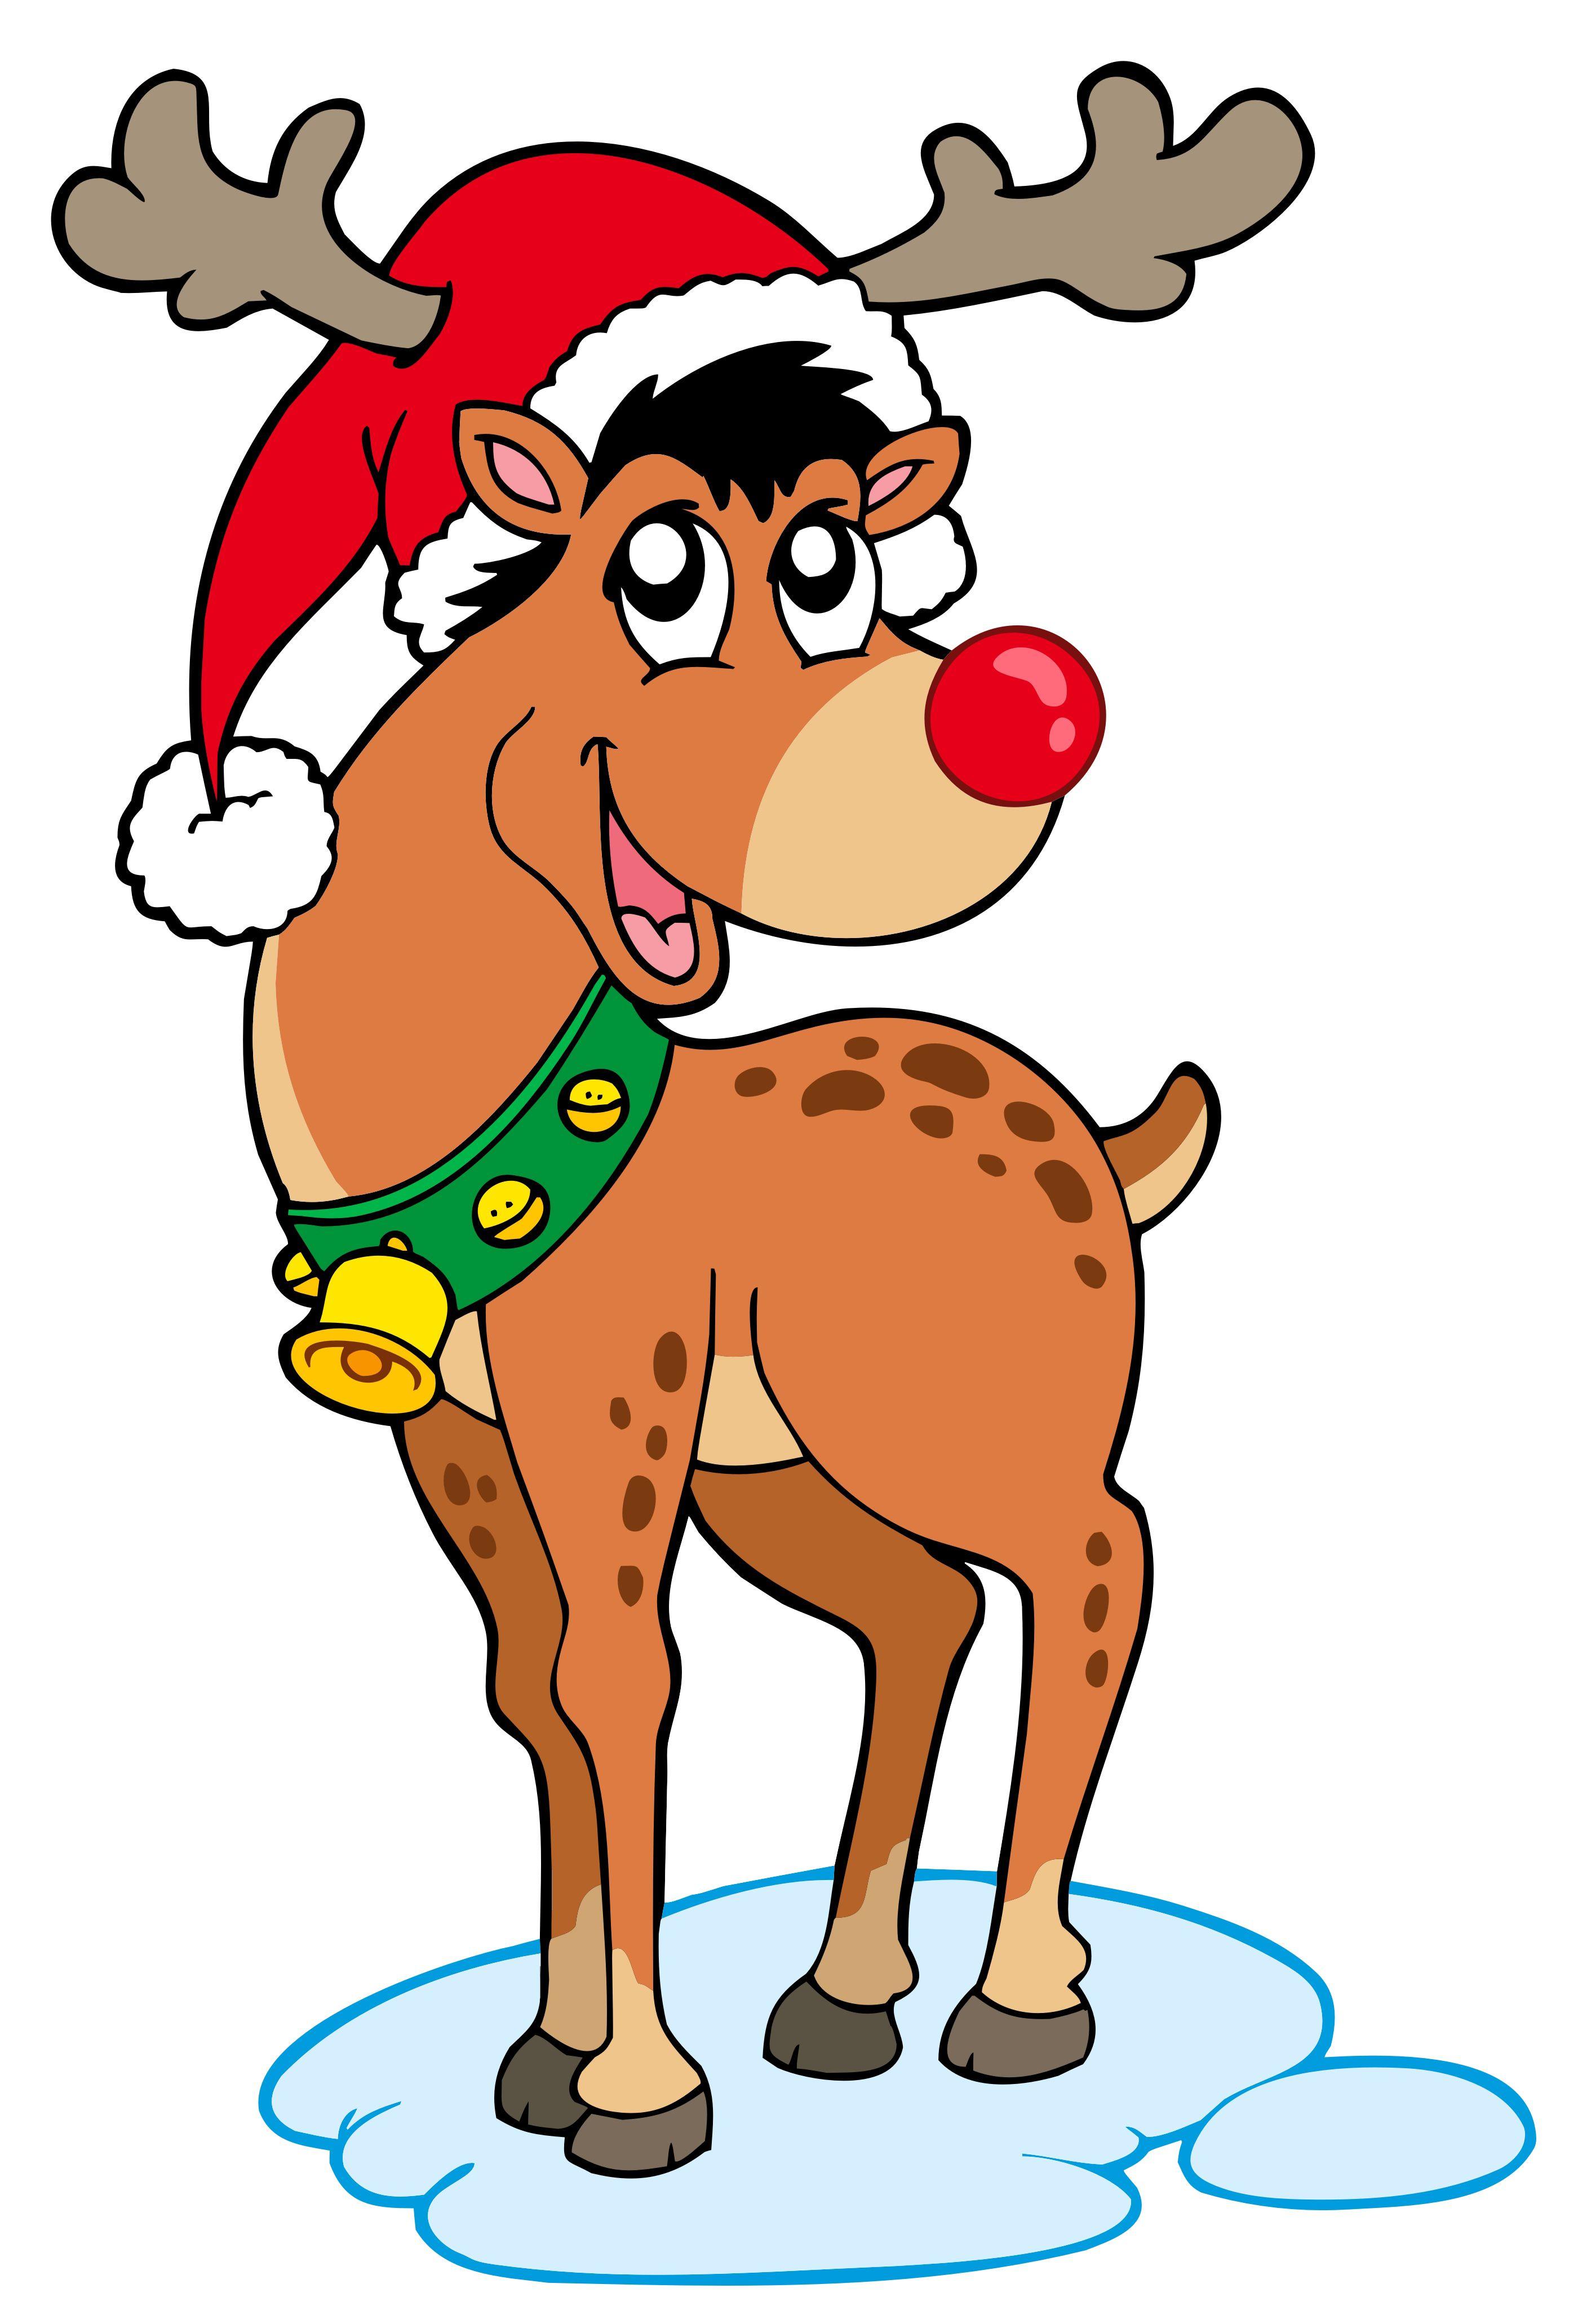 Free Rudolph Reindeer Picture, Download Free Clip Art, Free Clip